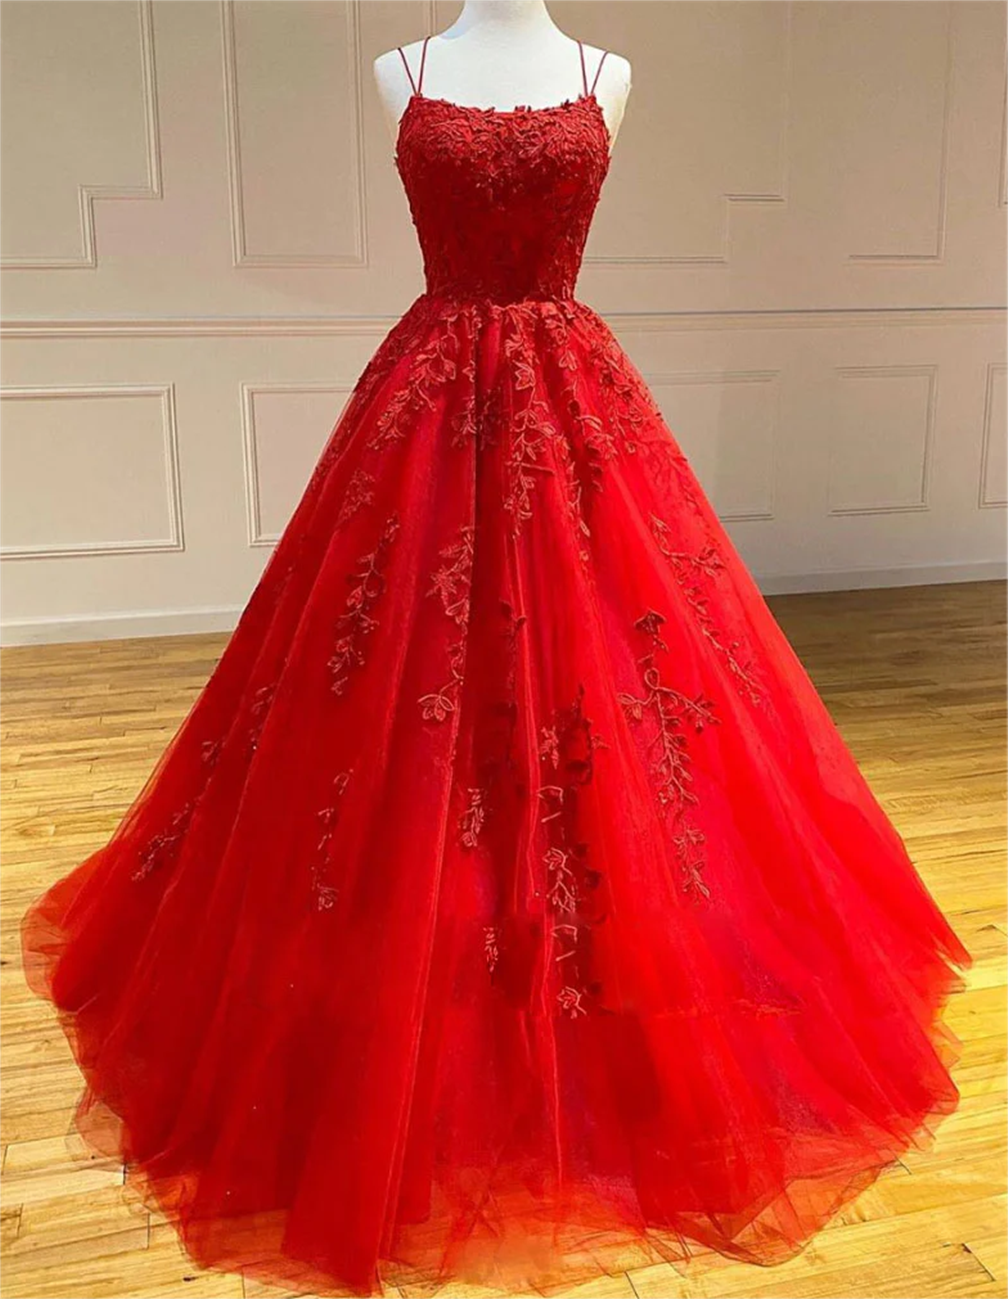 Women A-line Tulle Lace Prom Dresses Long Appliques Evening Party Gowns Sleeveless Formal Dress Yp102